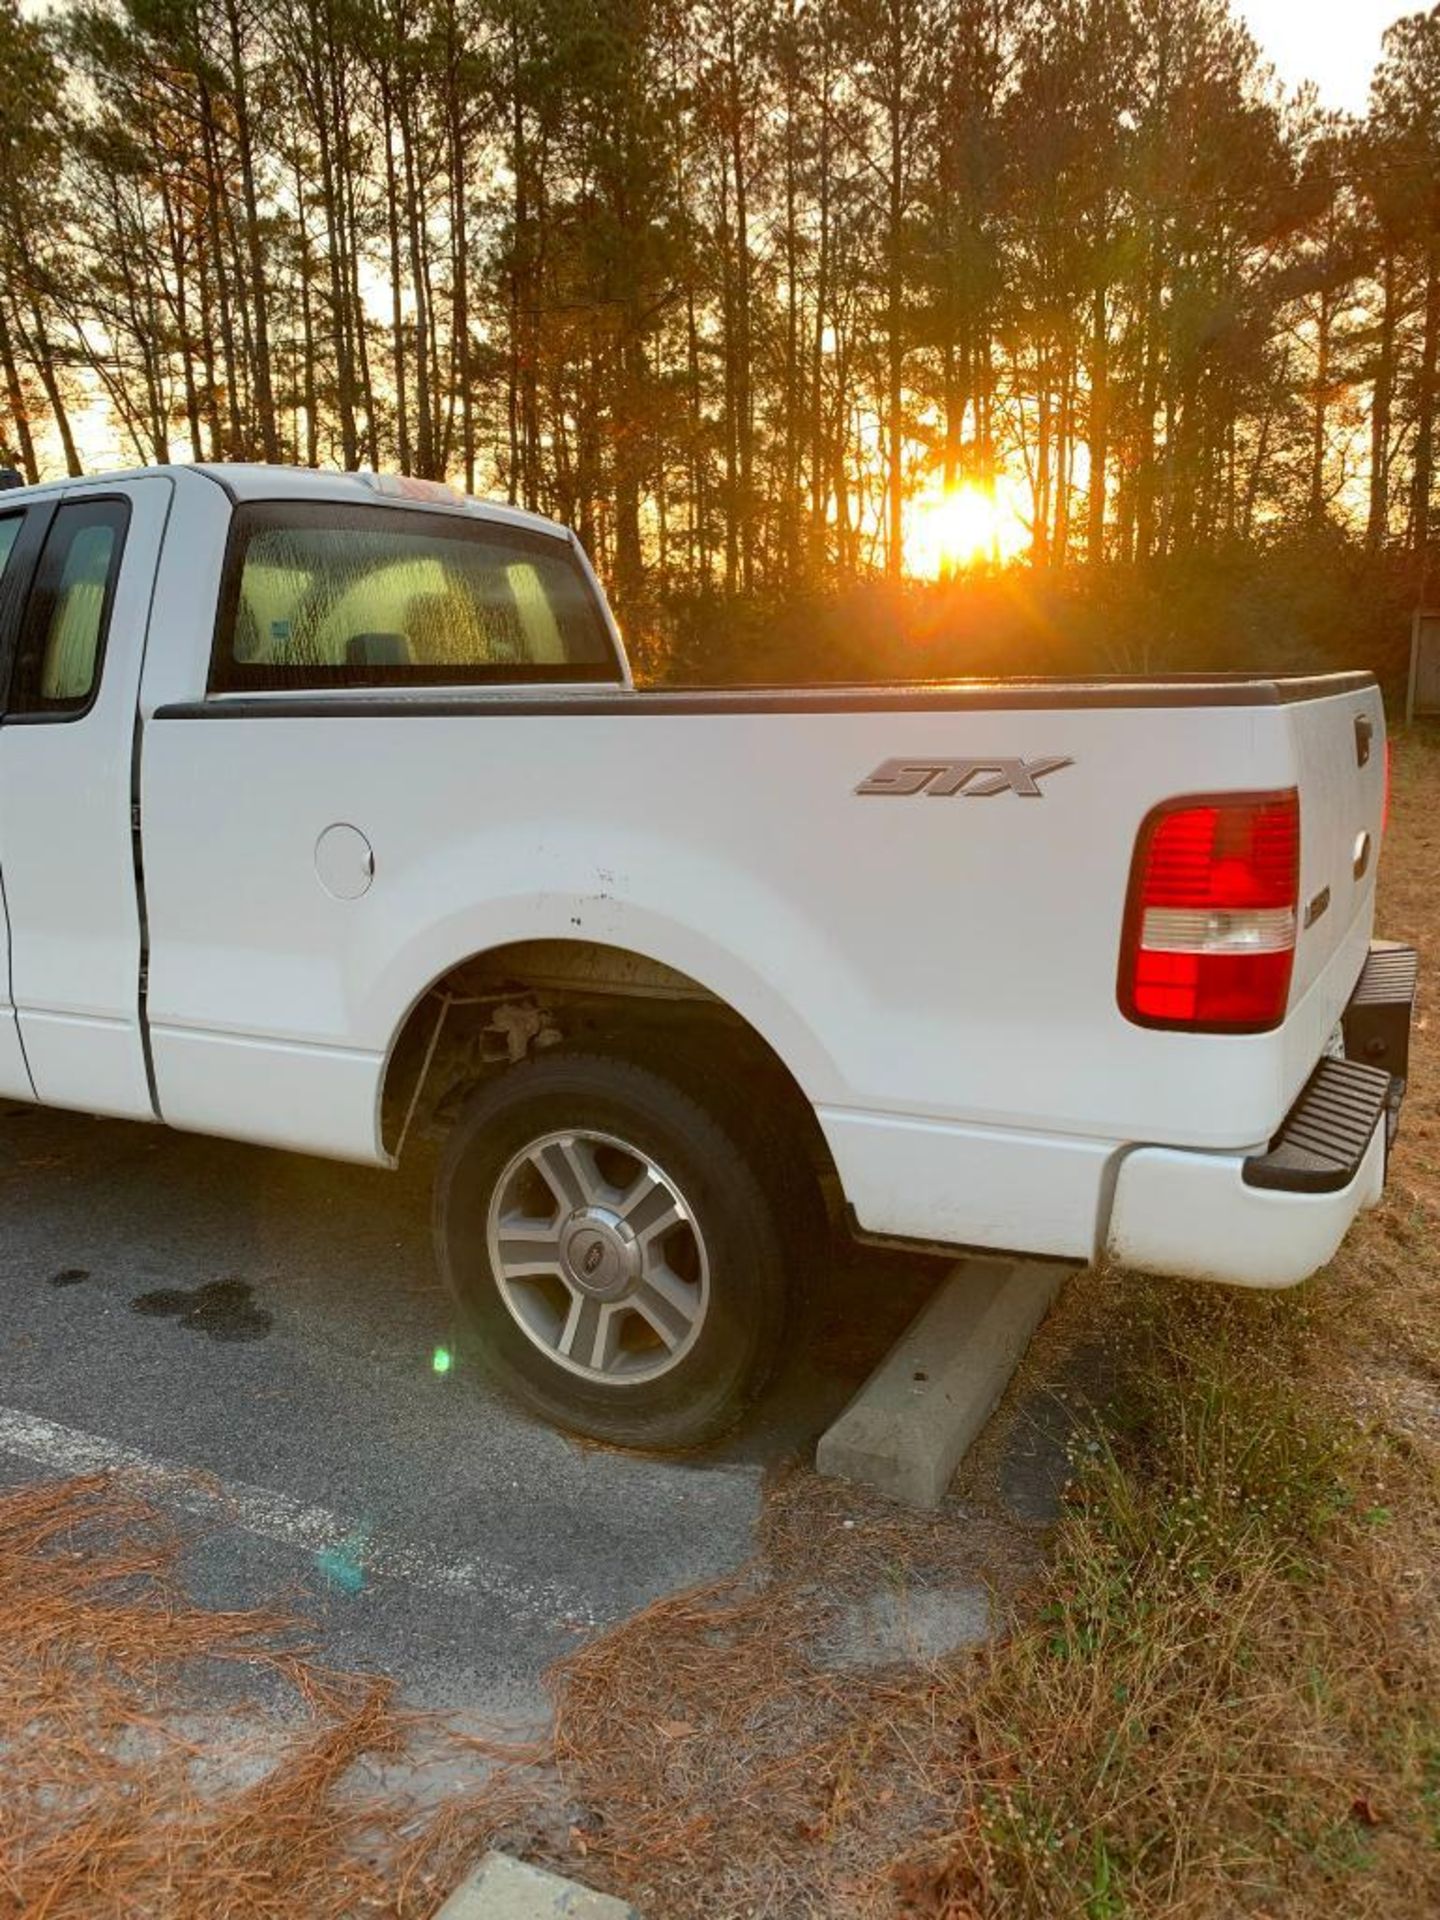 2008 FORD F-150 STX PICK-UP TRUCK, STANDARD CAB, AUTOMATIC TRANSMISSION, 2-WHEEL DRIVE, 70,003 MILES - Image 5 of 9